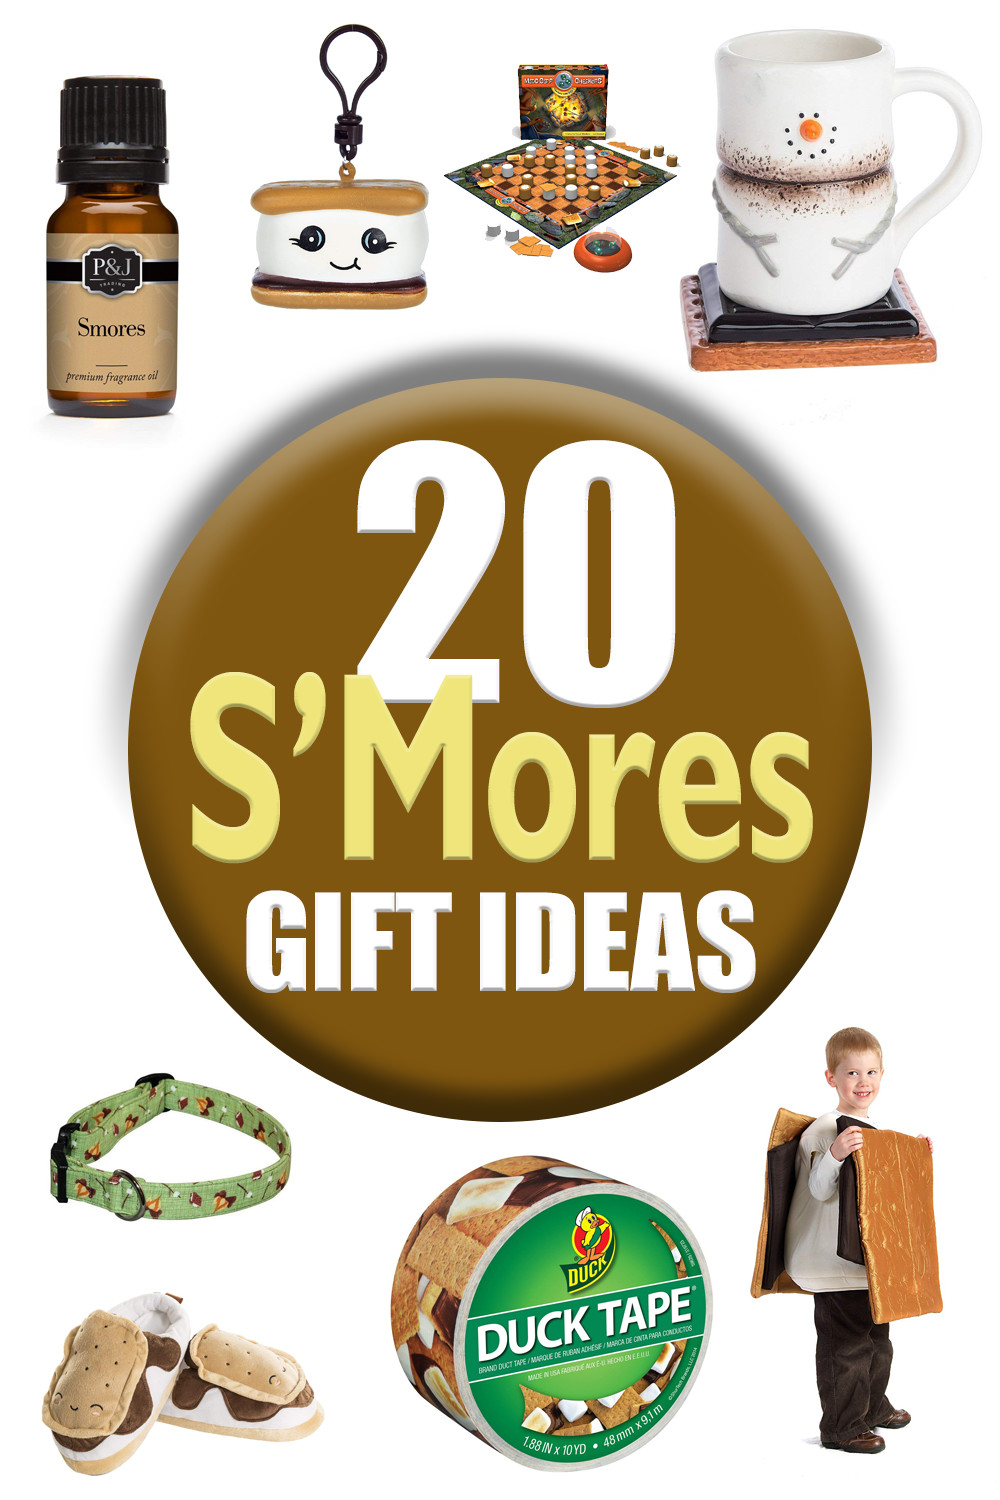 Show your love for S'Mores without excess calories with a variety of s'more themed merchandise including clothing, games, candles, decorations and more! - SahmReviews.com